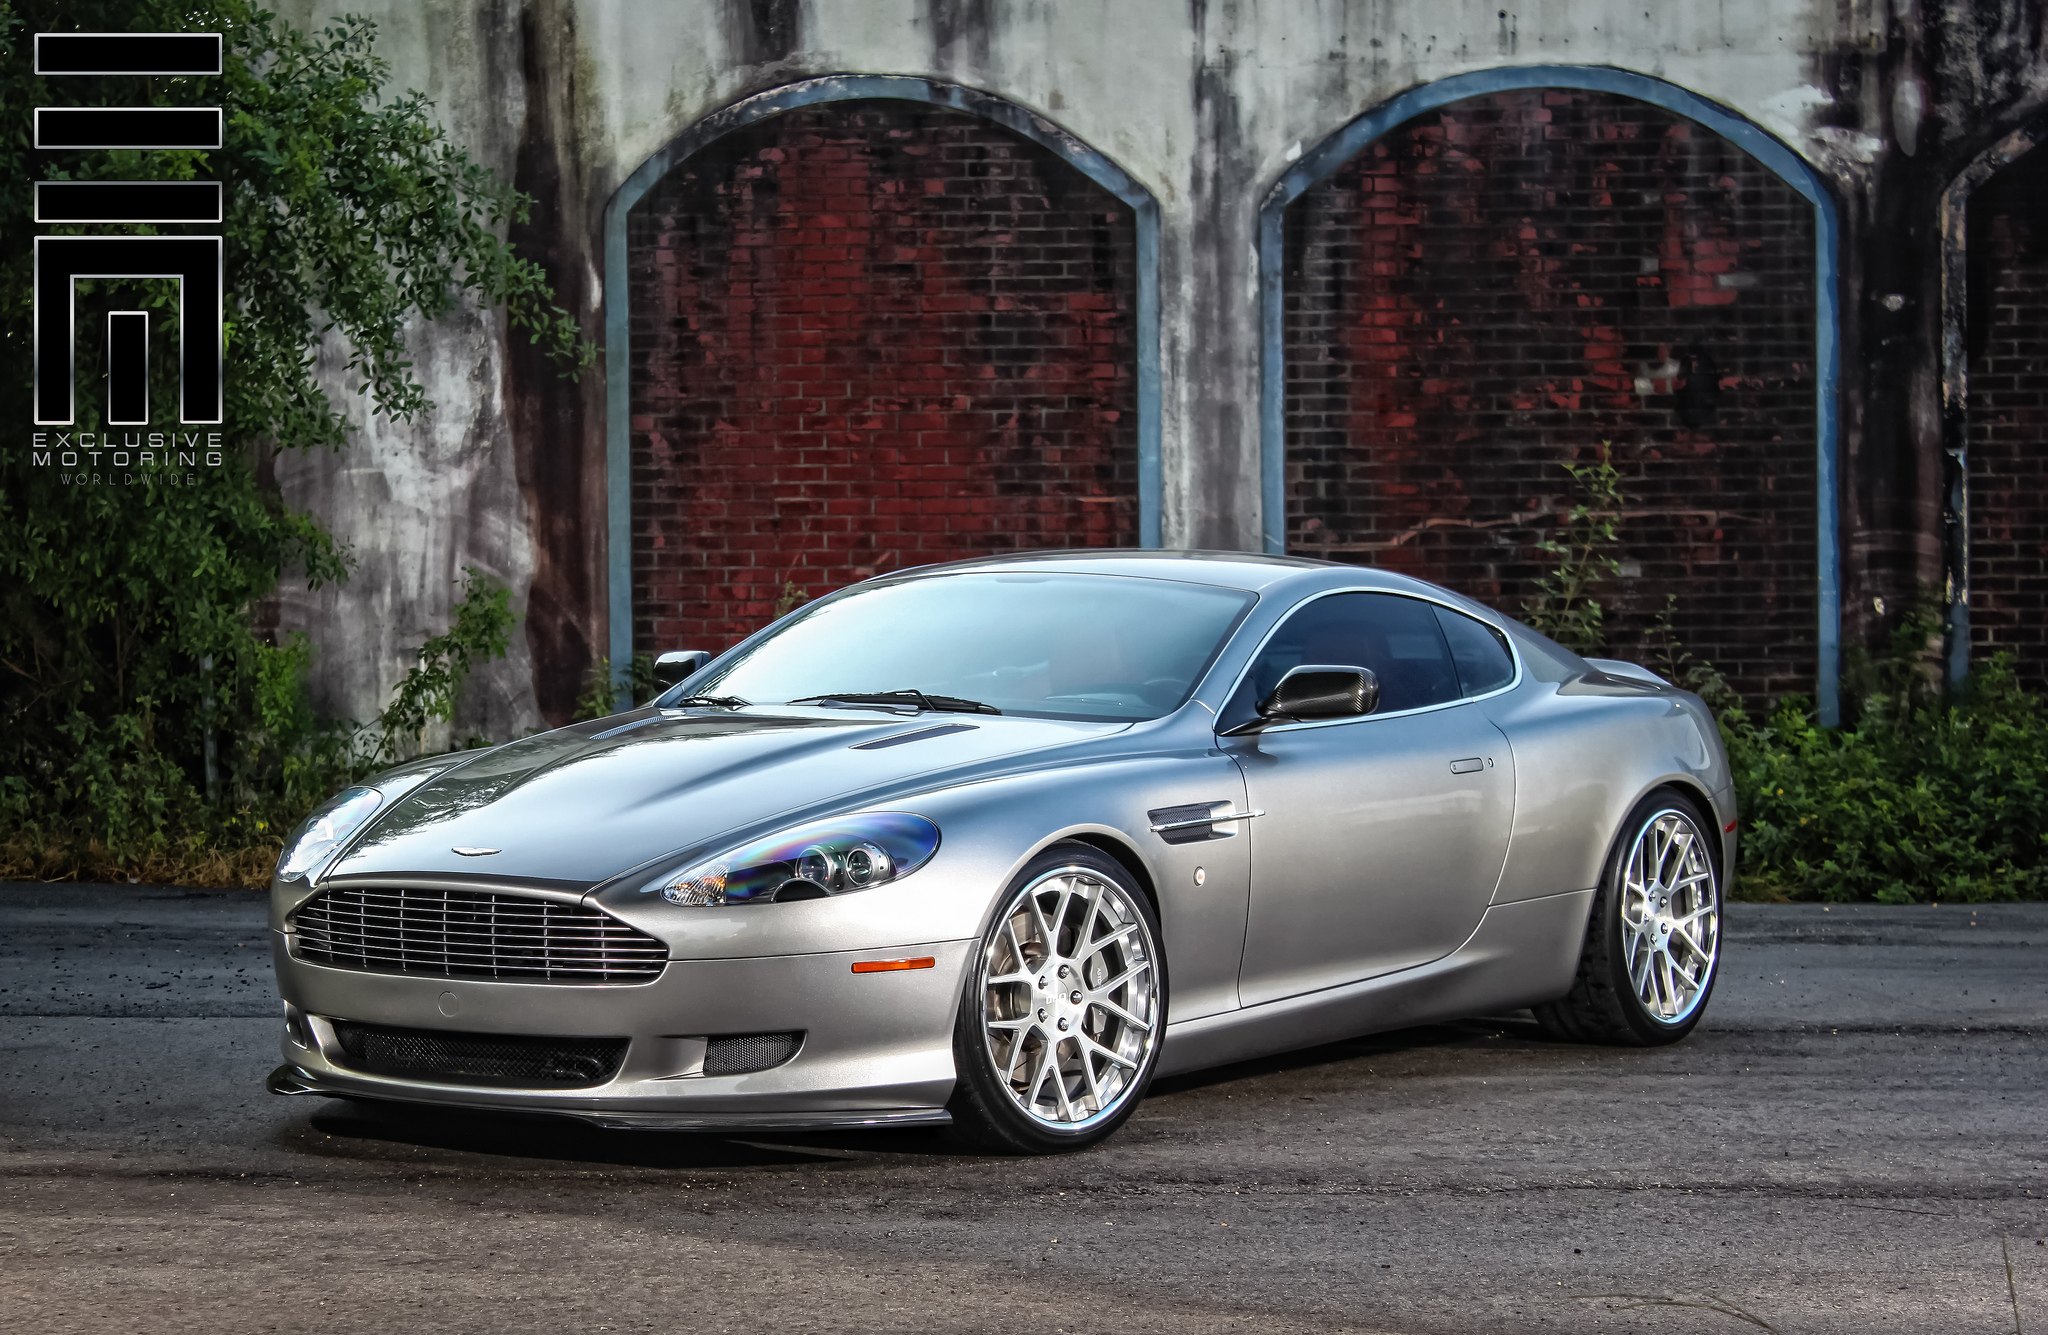 Aston Martin With Subtle Upgrades - Photo by Exclusive Motoring